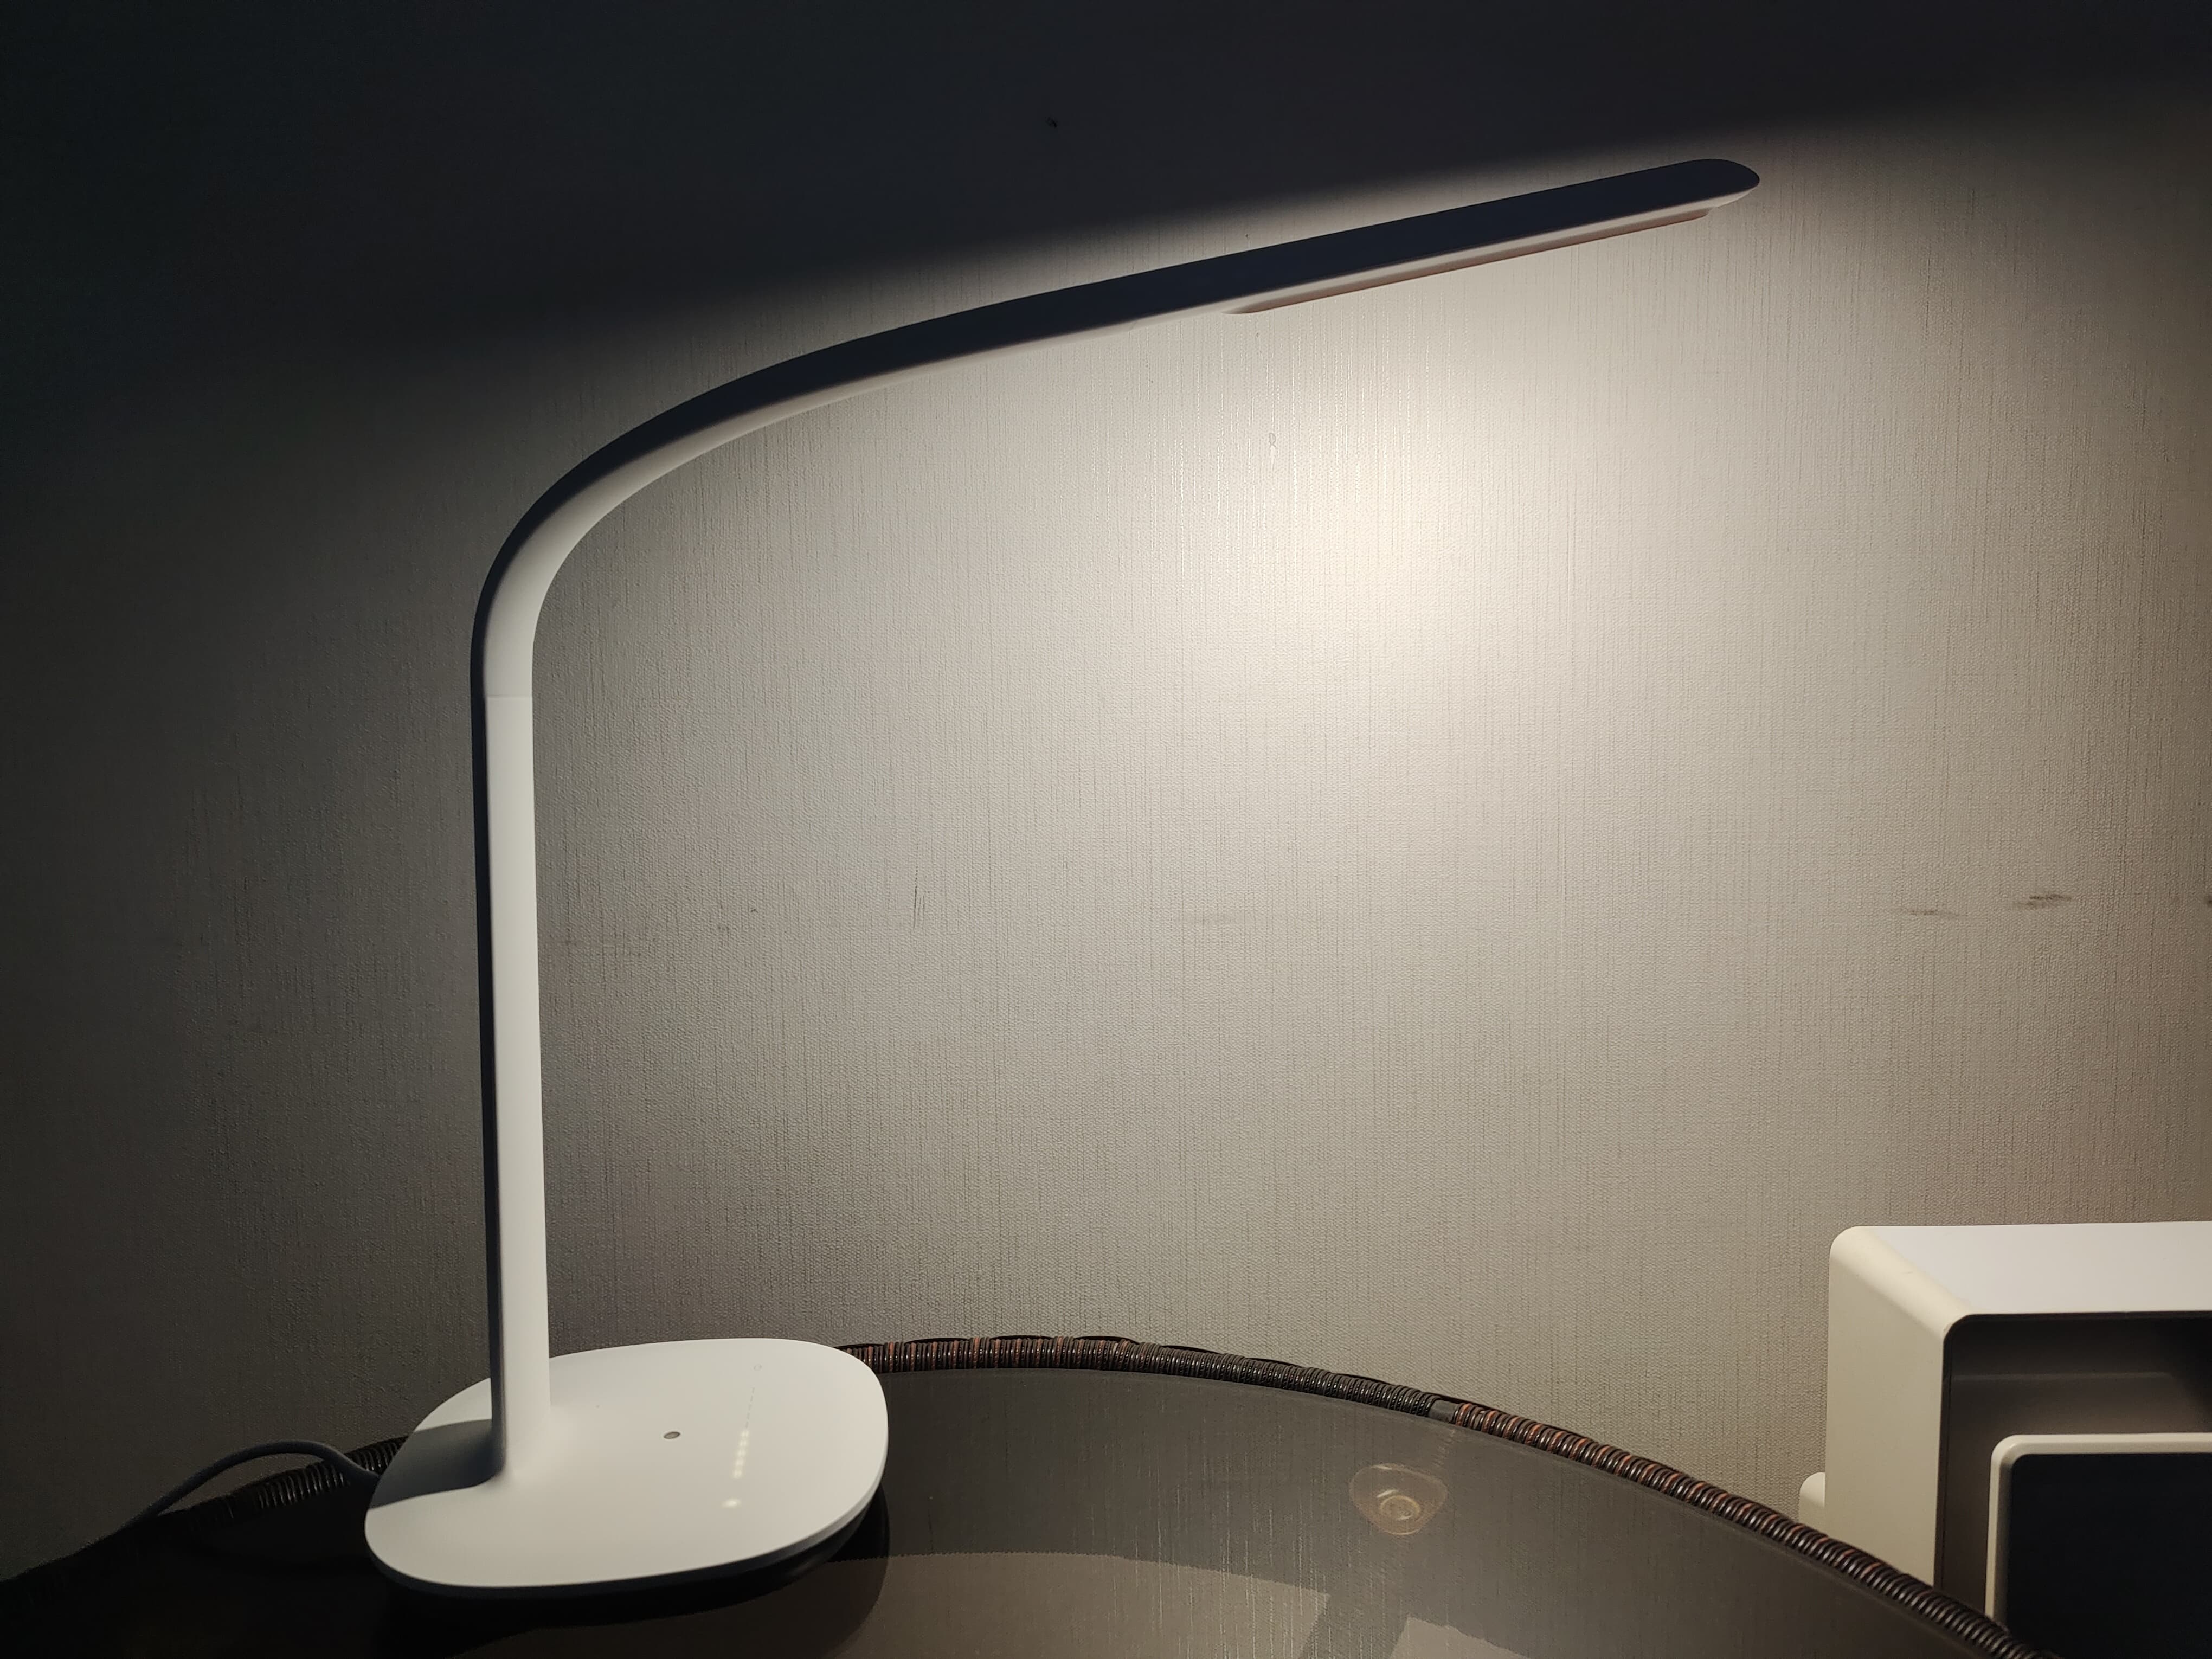 Mijia Philips Desk Lamp 3 out of the box: eye protection without stroboscopic appearance